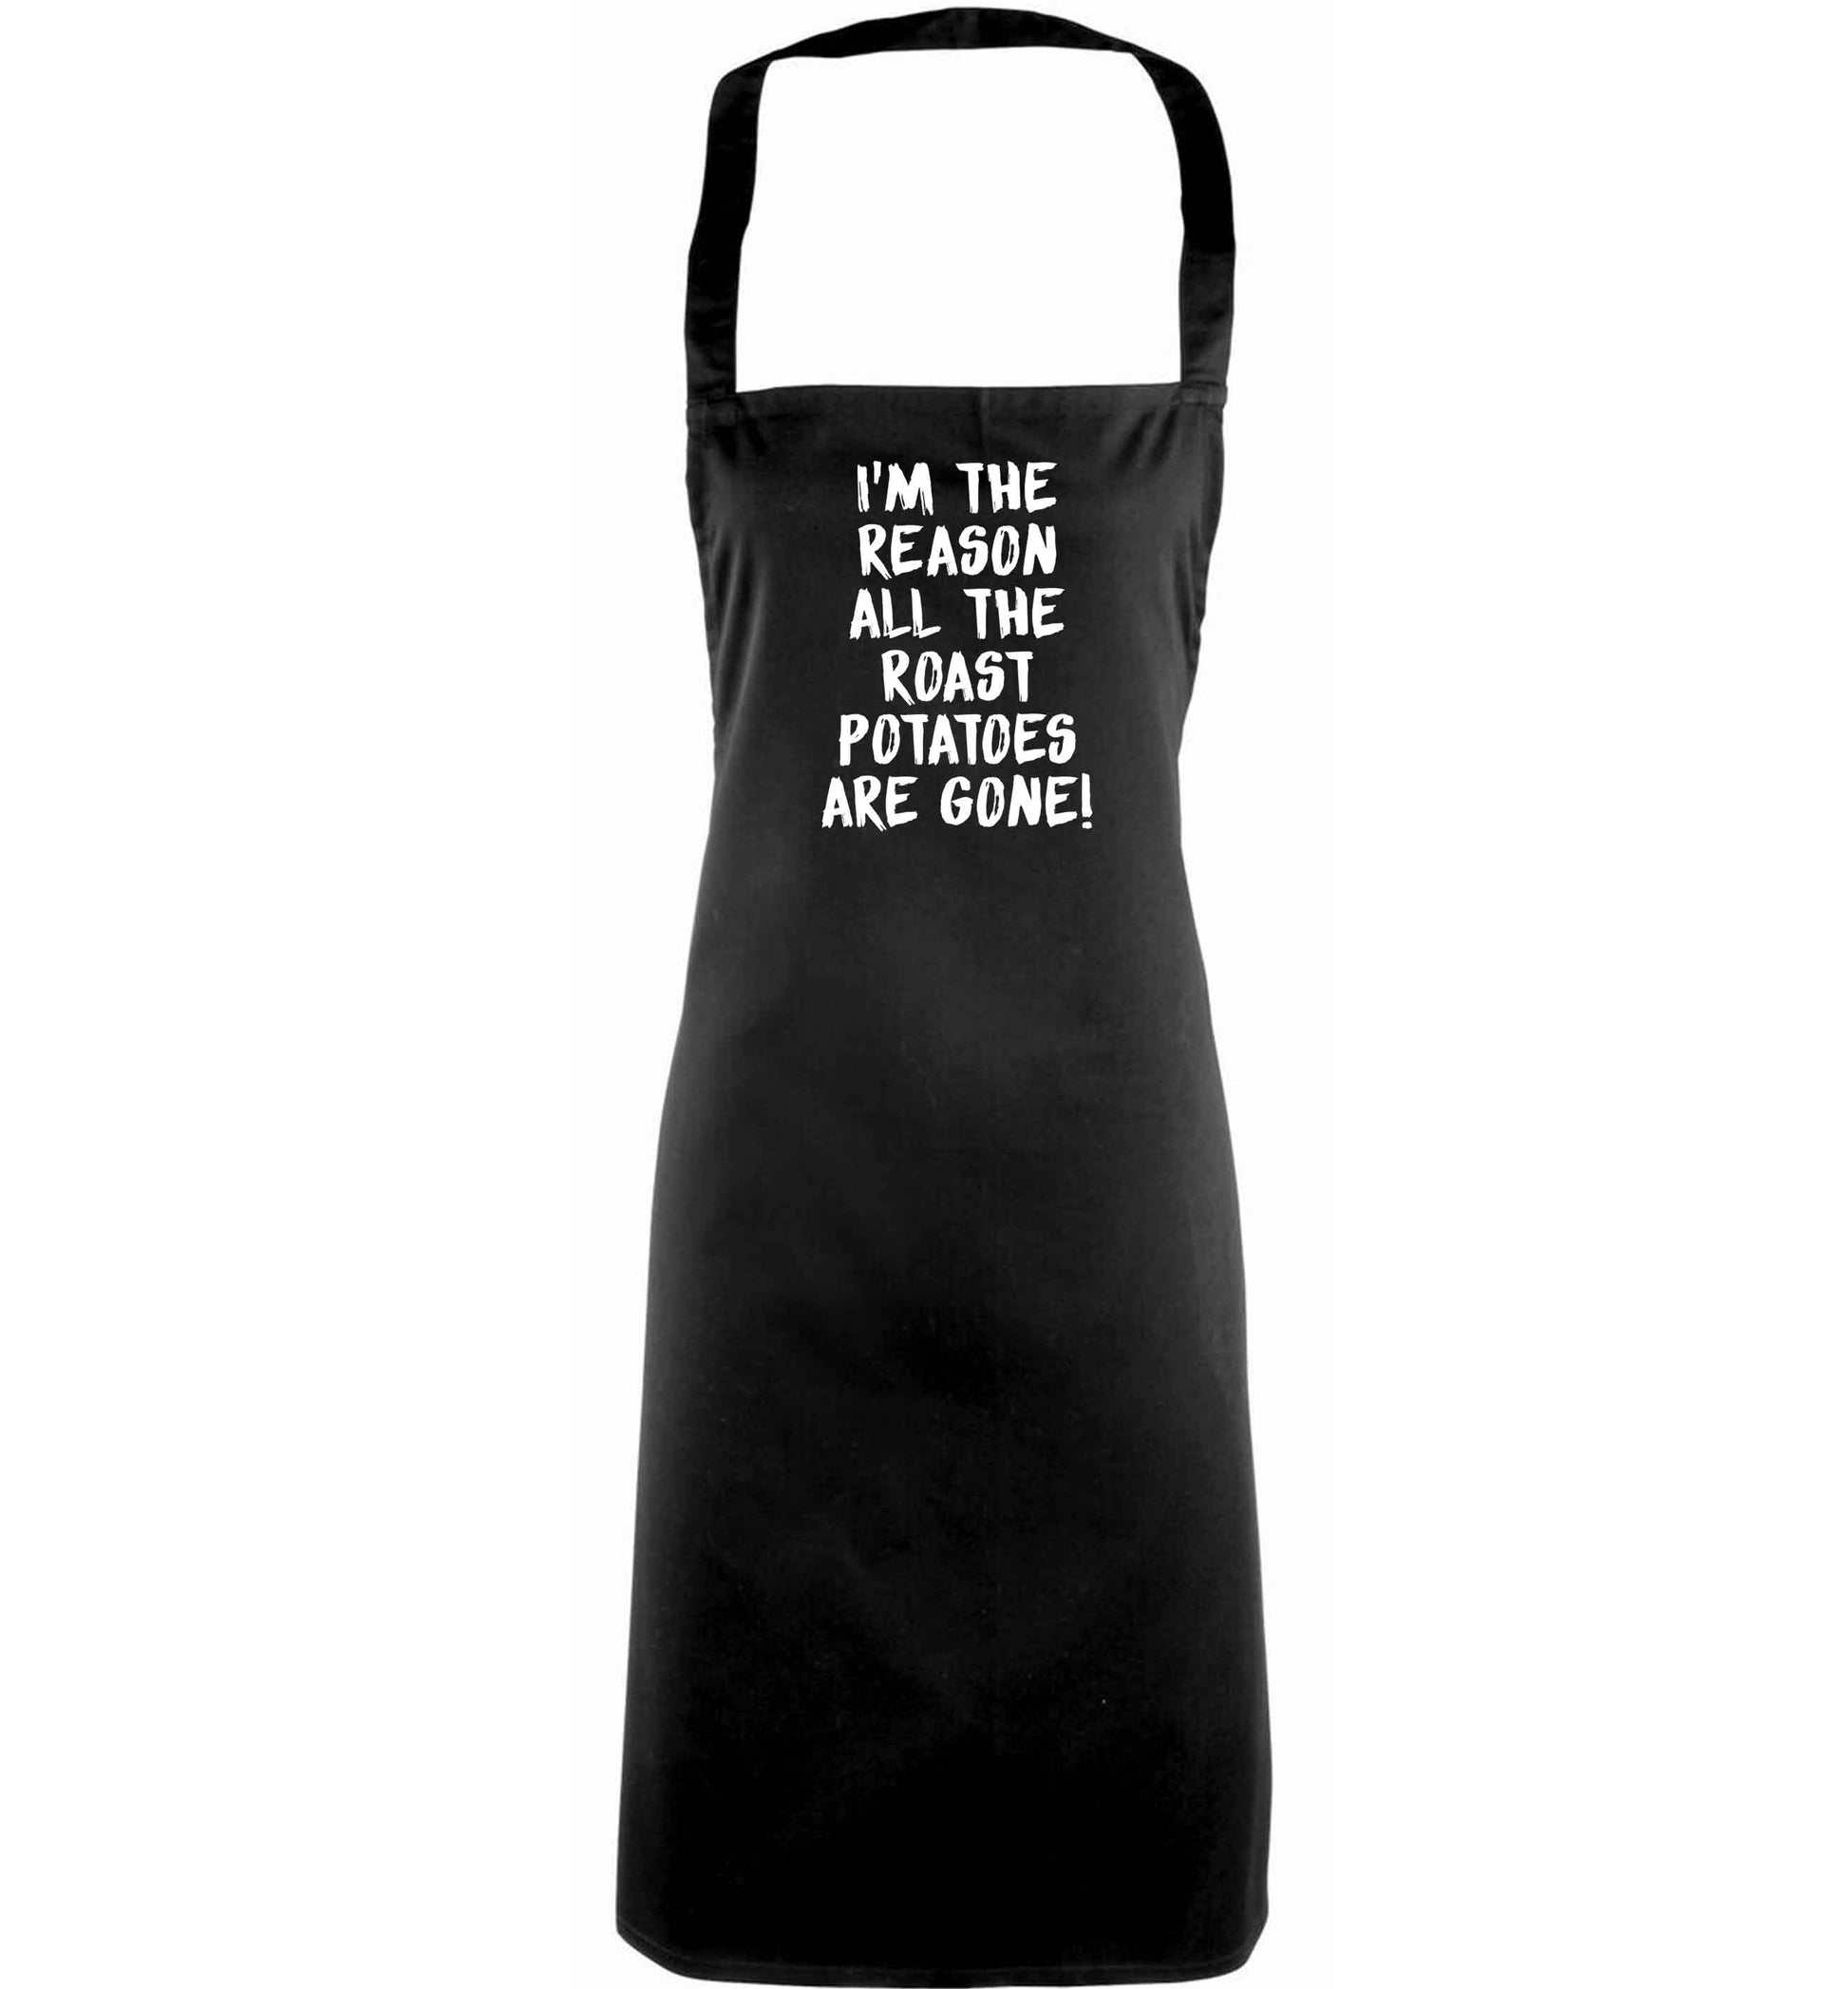 I'm the reason all the roast potatoes are gone adults black apron